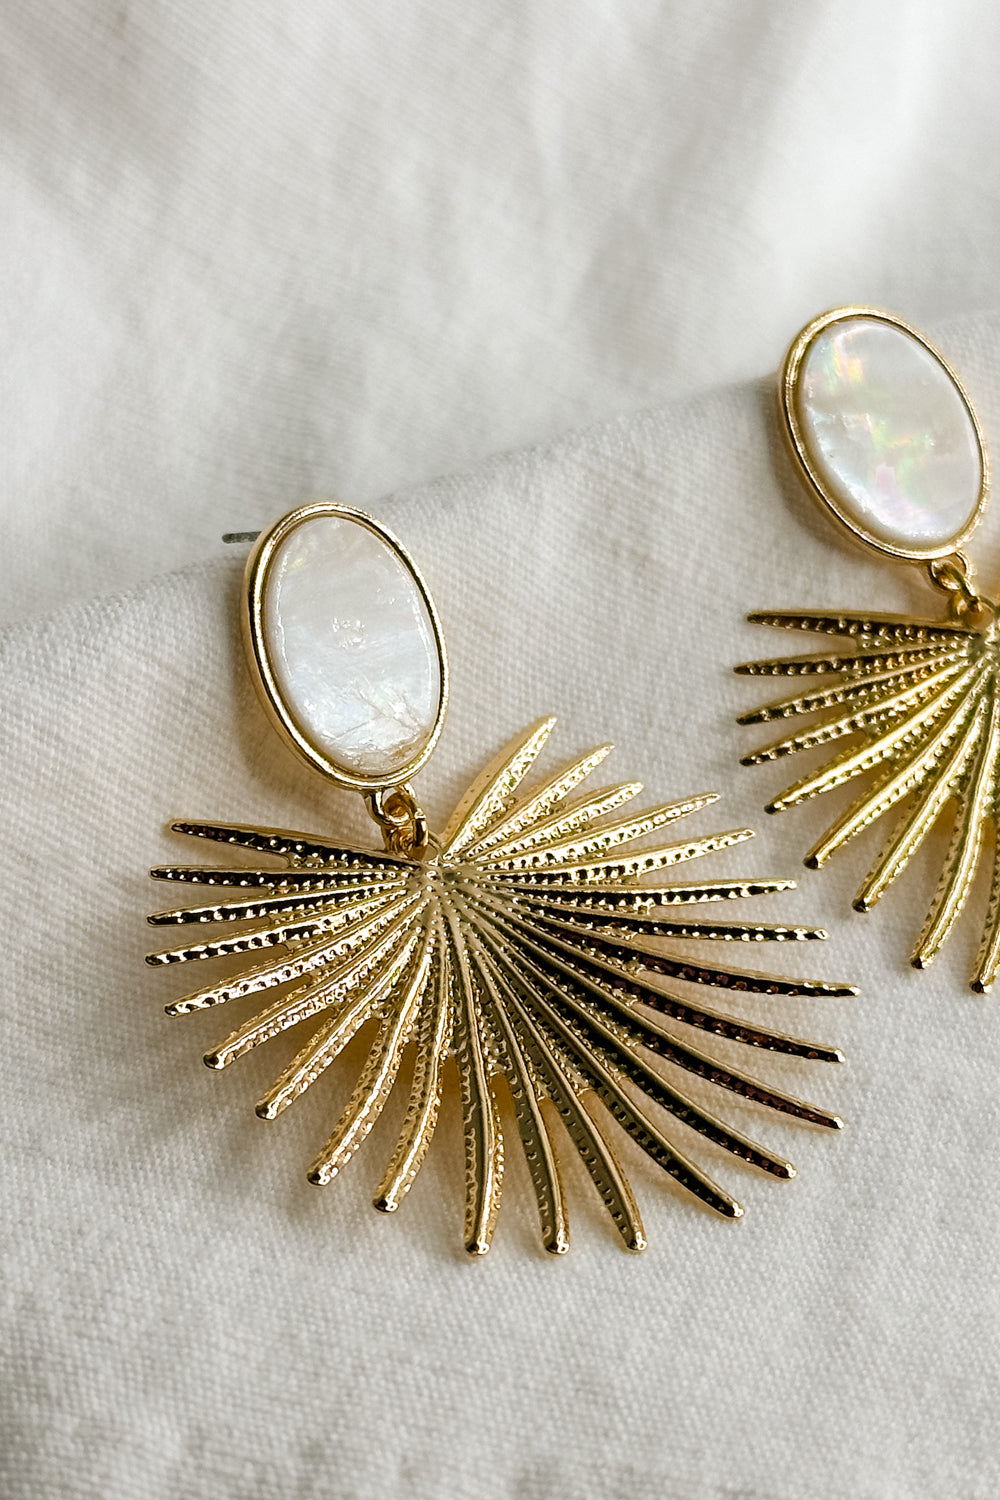 Flat lay view of the Penelope Gold & Opal Starburst Dangle Earring which features Gold stabrust earrings with opal stone design